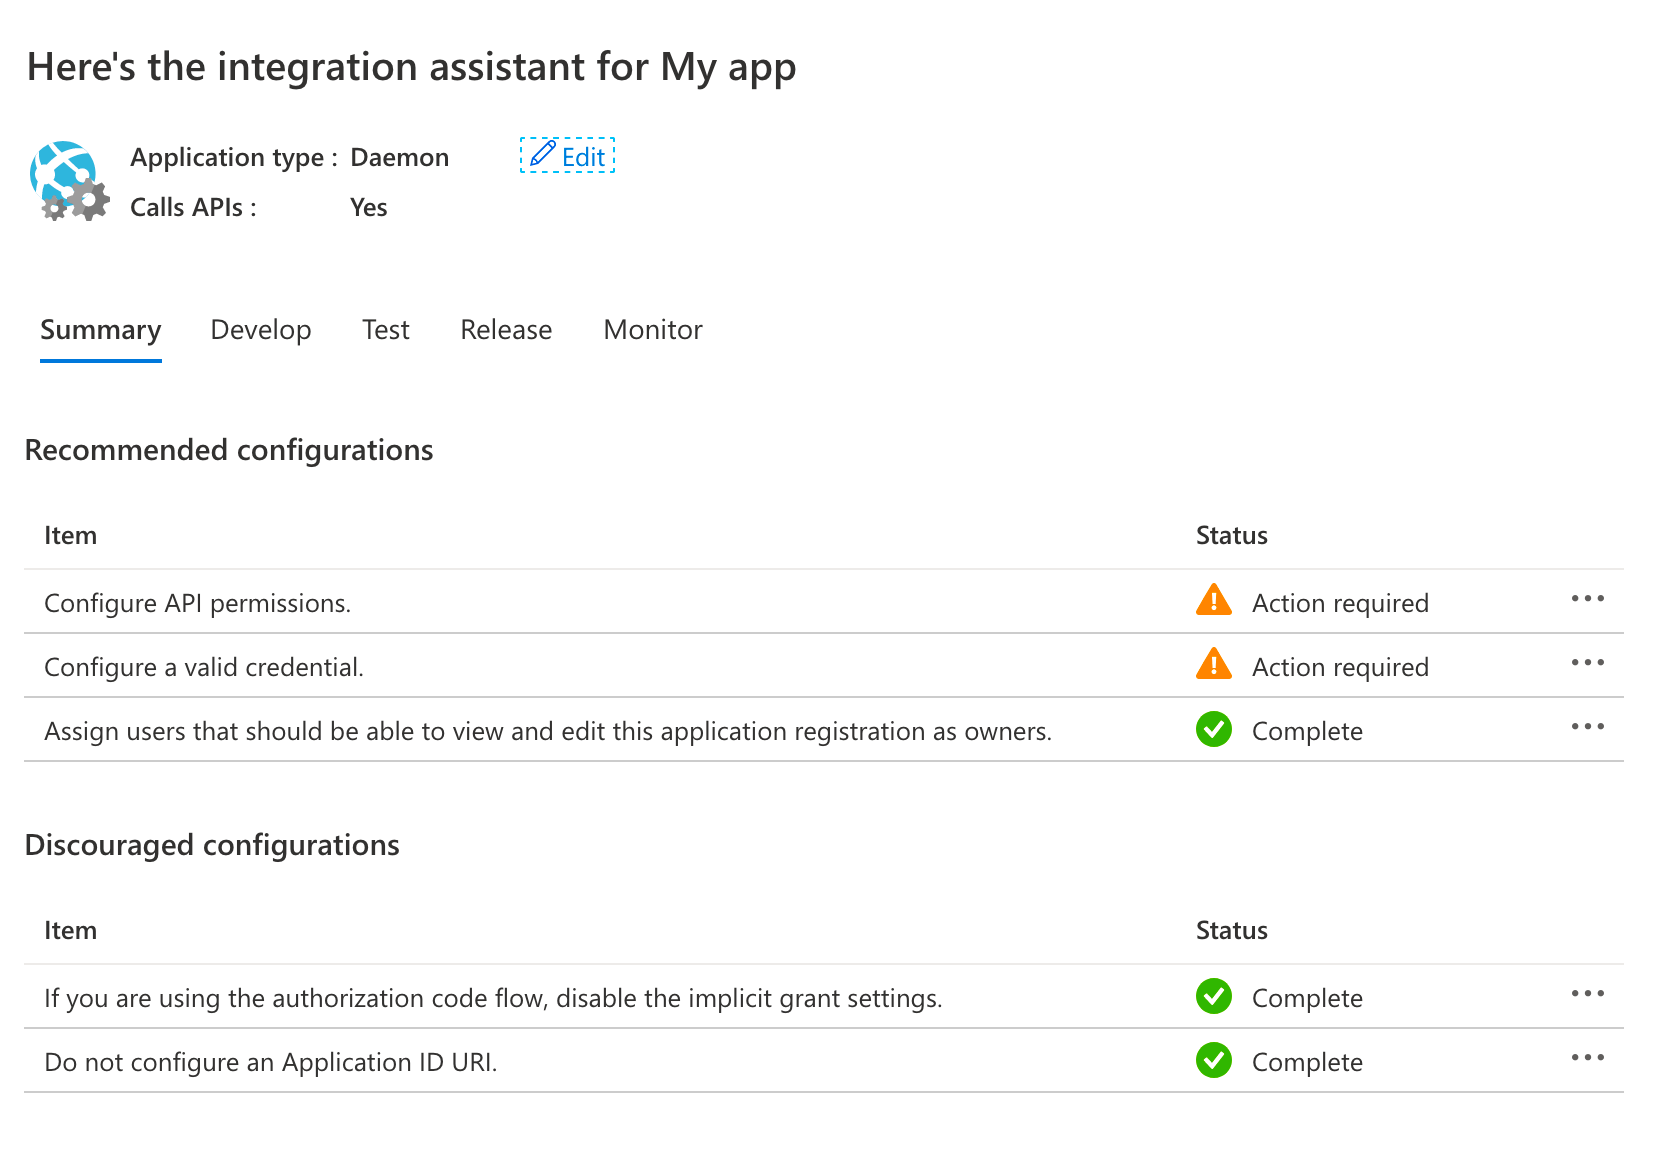 Configuration status displayed by the Integration assistant